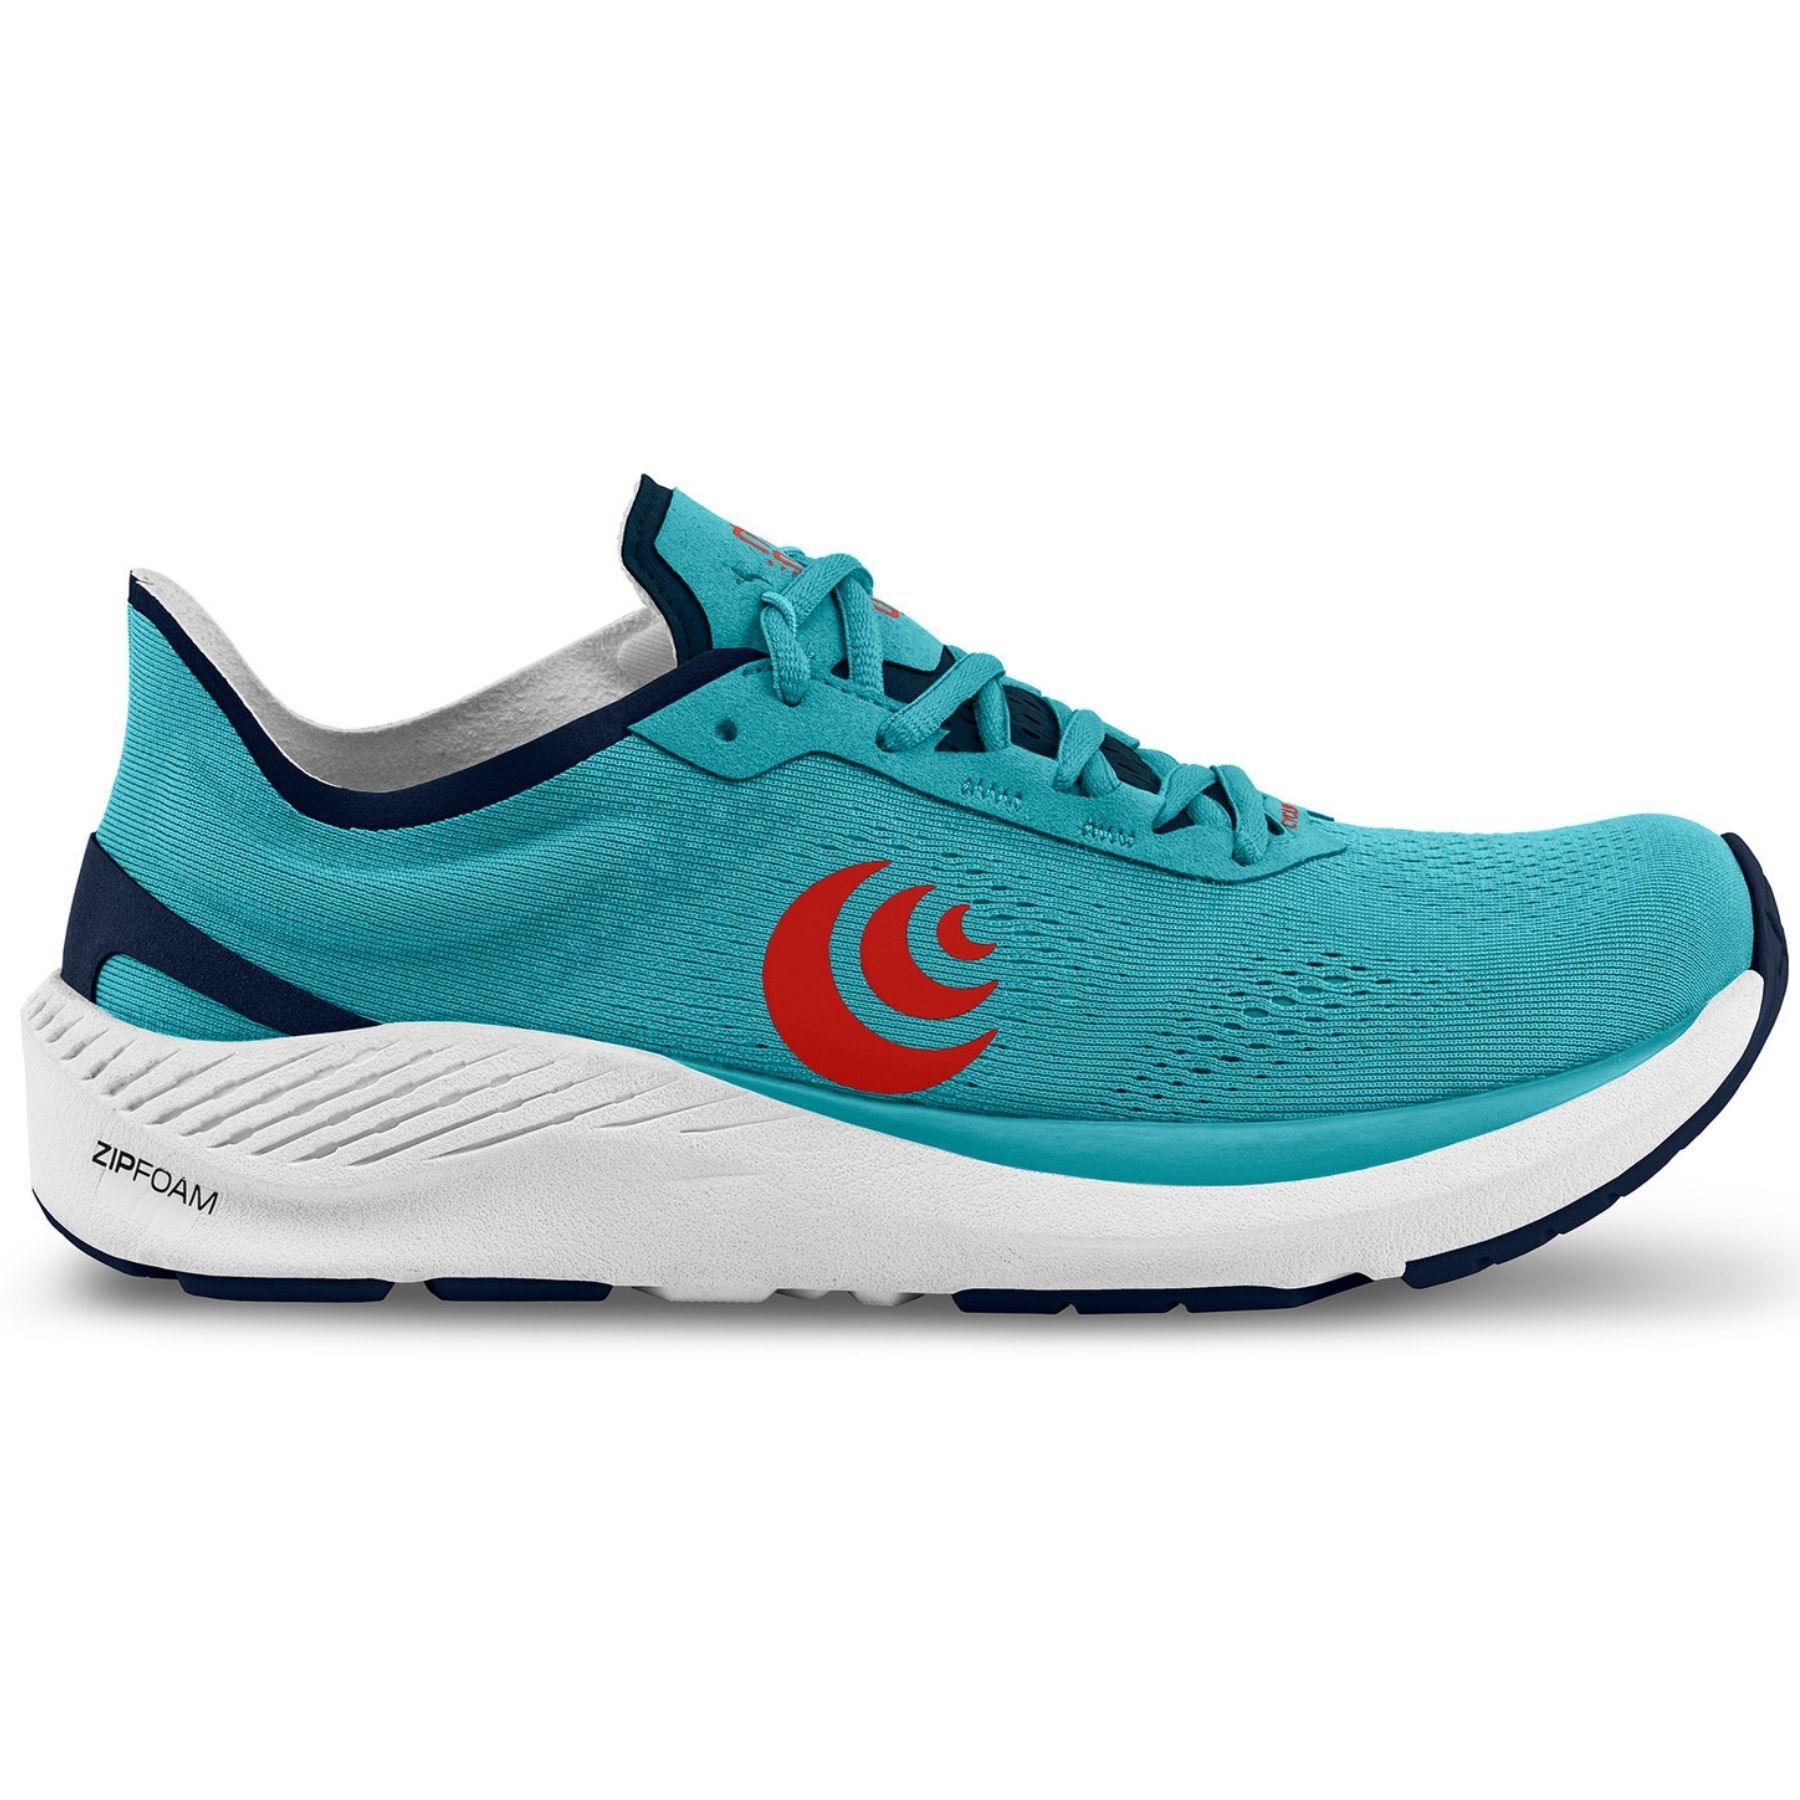 Topo Athletic Cyclone - Running shoes - Men's